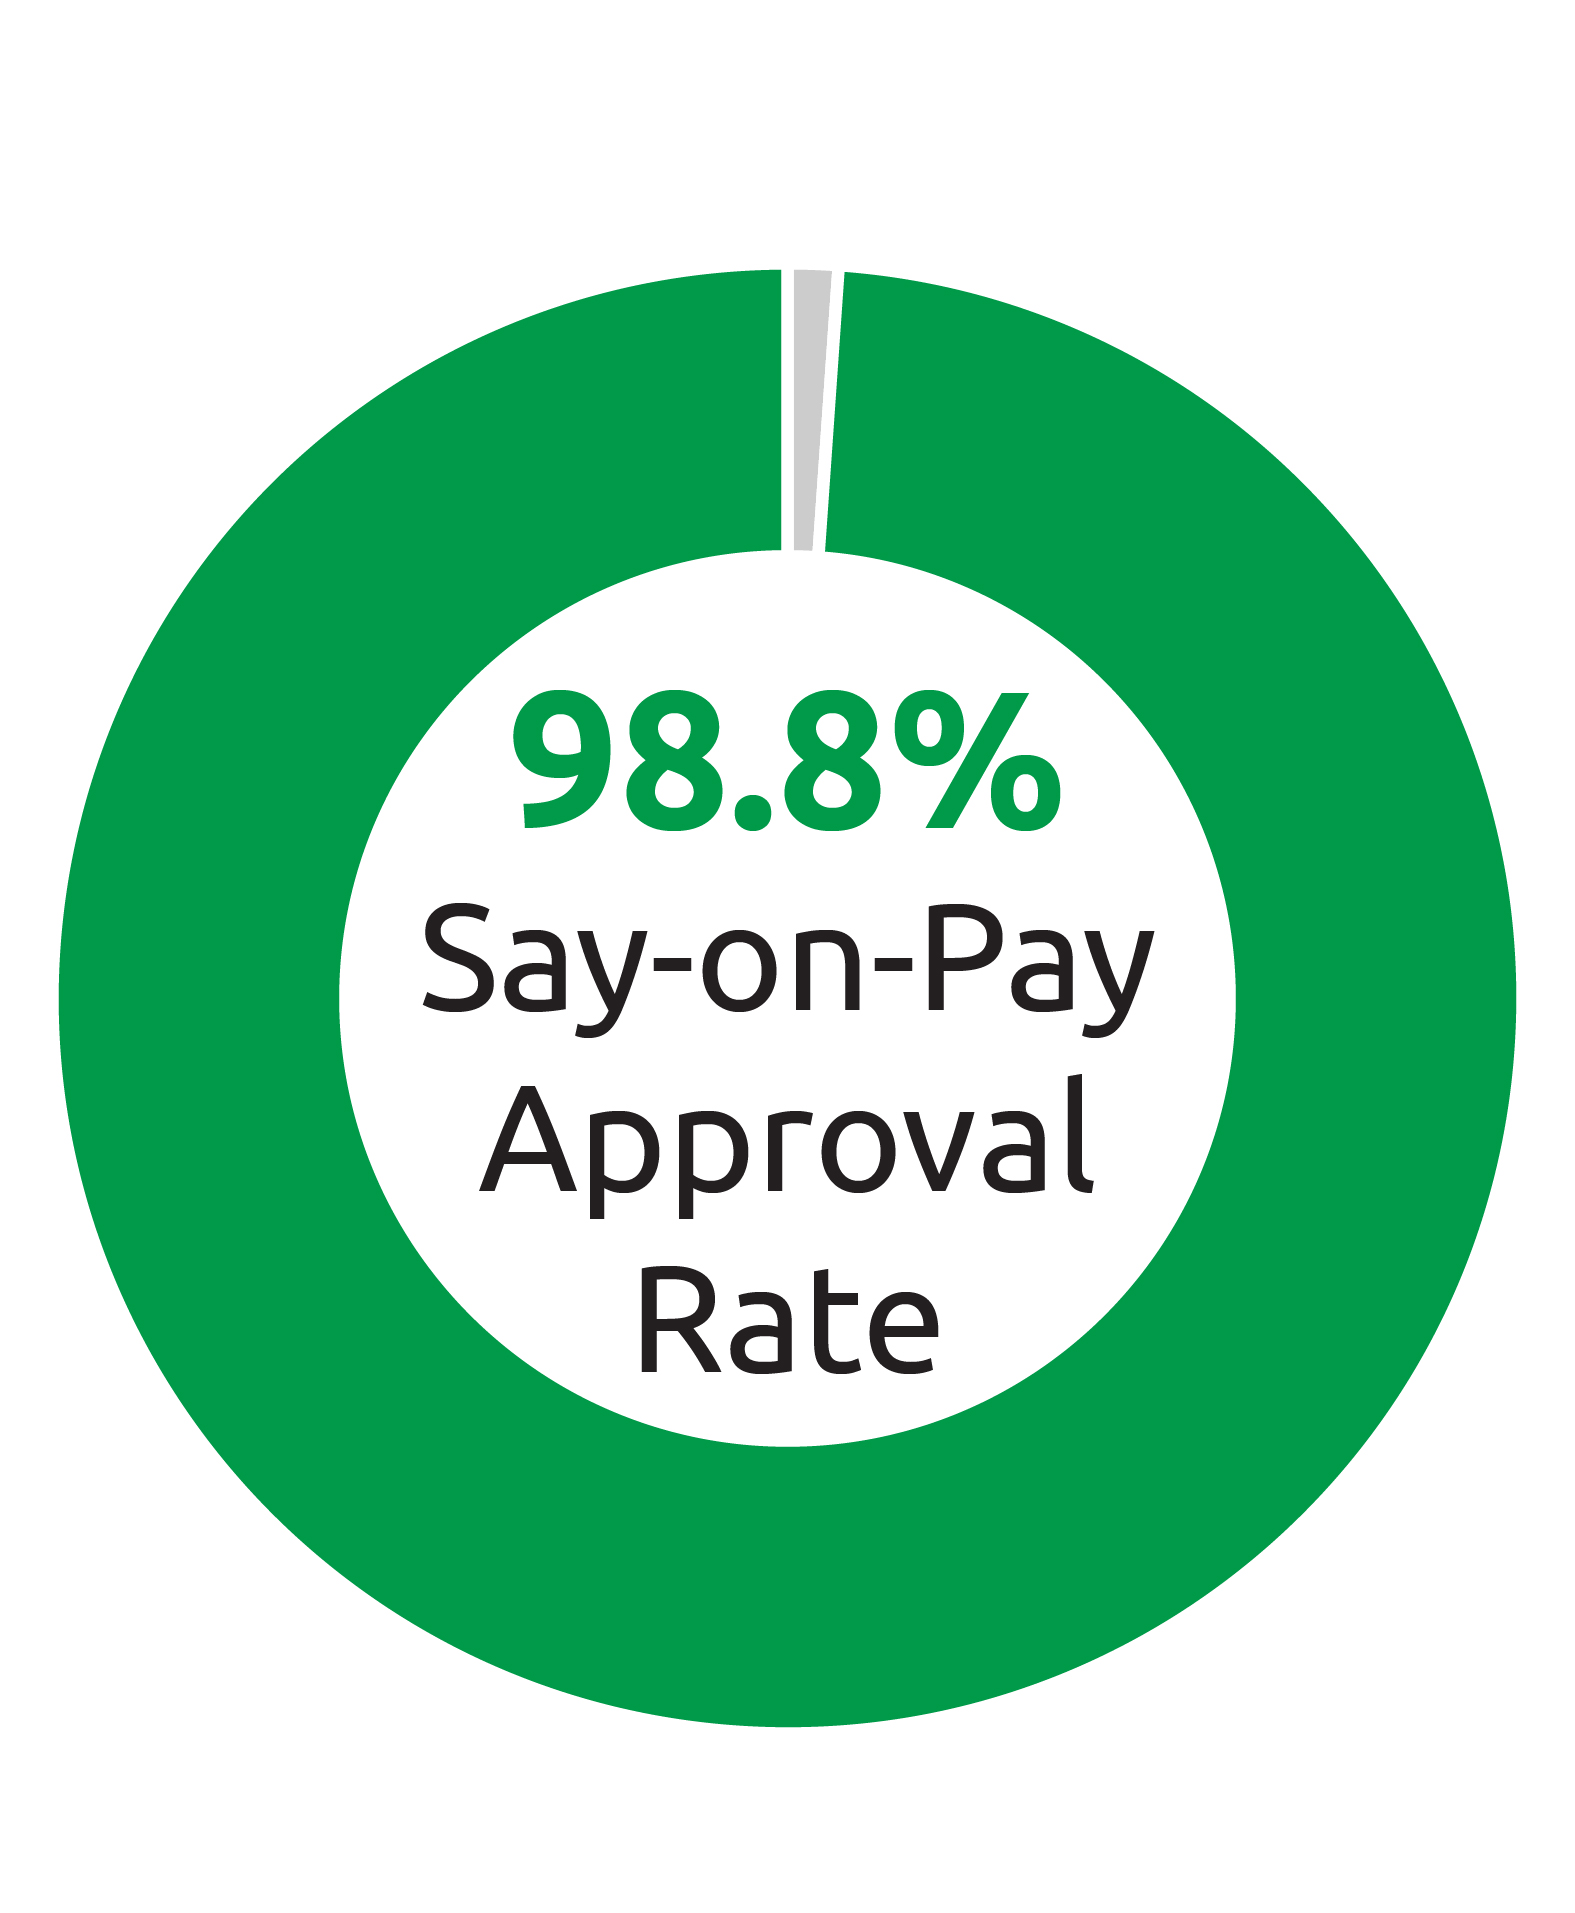 Pie-Charts_Soy-on-Pay-Approval-23.jpg